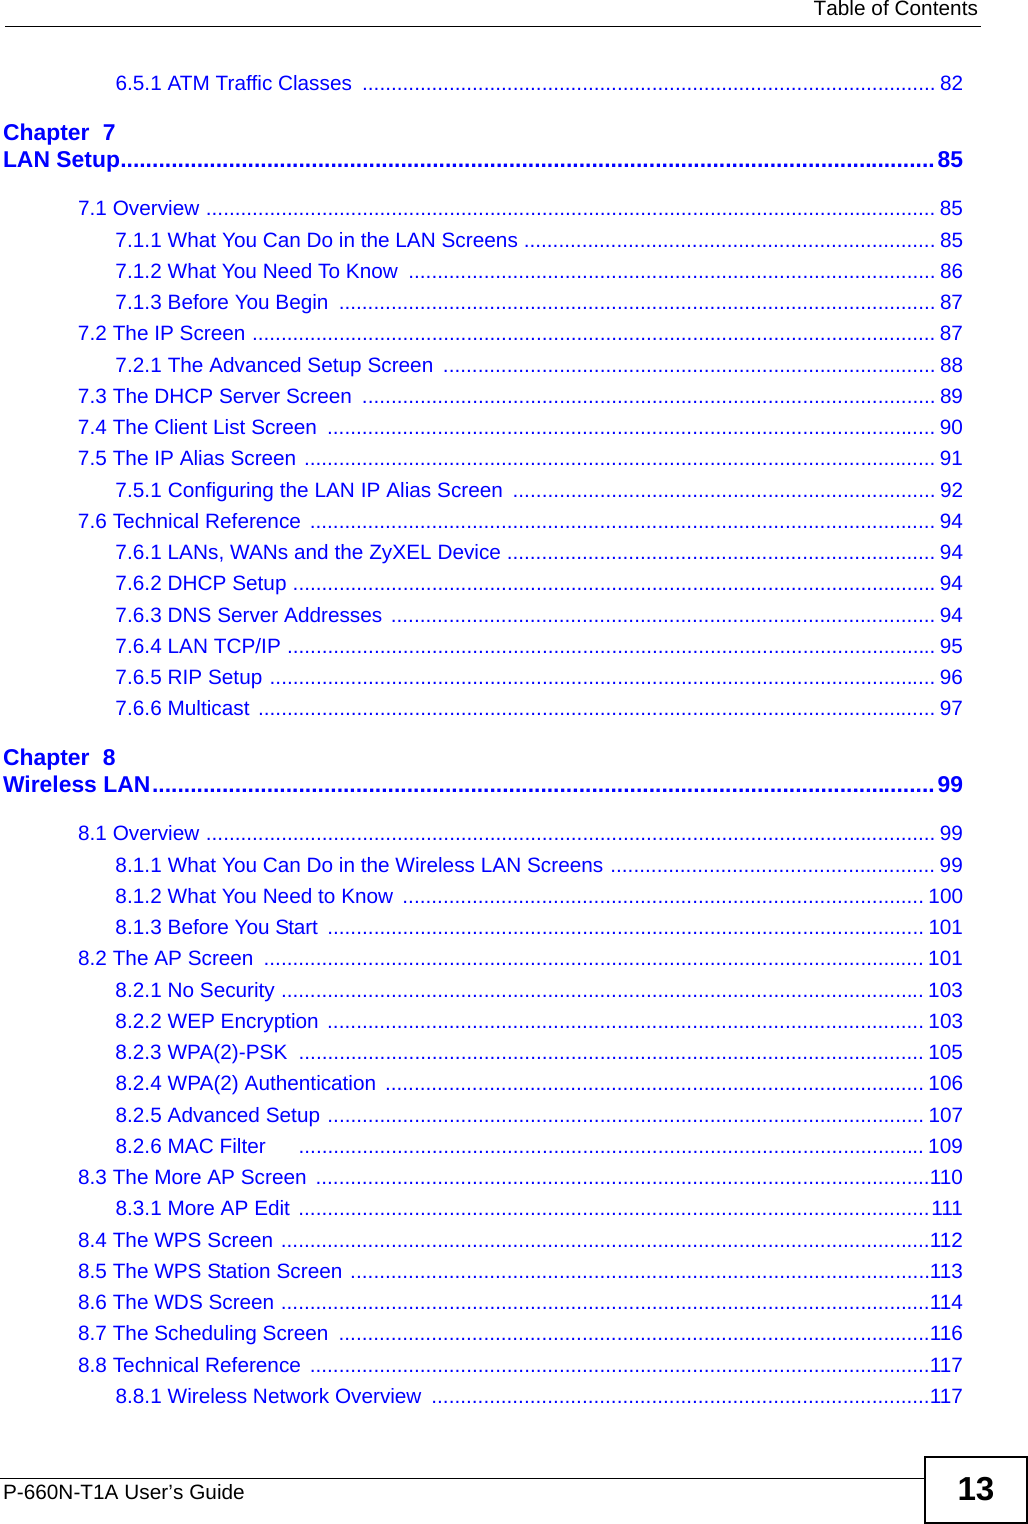   Table of ContentsP-660N-T1A User’s Guide 136.5.1 ATM Traffic Classes  ................................................................................................... 82Chapter  7LAN Setup................................................................................................................................857.1 Overview .............................................................................................................................. 857.1.1 What You Can Do in the LAN Screens ....................................................................... 857.1.2 What You Need To Know  ........................................................................................... 867.1.3 Before You Begin  ....................................................................................................... 877.2 The IP Screen ...................................................................................................................... 877.2.1 The Advanced Setup Screen  ..................................................................................... 887.3 The DHCP Server Screen  ................................................................................................... 897.4 The Client List Screen  ......................................................................................................... 907.5 The IP Alias Screen ............................................................................................................. 917.5.1 Configuring the LAN IP Alias Screen  ......................................................................... 927.6 Technical Reference  ............................................................................................................ 947.6.1 LANs, WANs and the ZyXEL Device .......................................................................... 947.6.2 DHCP Setup ...............................................................................................................947.6.3 DNS Server Addresses .............................................................................................. 947.6.4 LAN TCP/IP ................................................................................................................ 957.6.5 RIP Setup ................................................................................................................... 967.6.6 Multicast ..................................................................................................................... 97Chapter  8Wireless LAN...........................................................................................................................998.1 Overview .............................................................................................................................. 998.1.1 What You Can Do in the Wireless LAN Screens ........................................................ 998.1.2 What You Need to Know  .......................................................................................... 1008.1.3 Before You Start  ....................................................................................................... 1018.2 The AP Screen  .................................................................................................................. 1018.2.1 No Security ............................................................................................................... 1038.2.2 WEP Encryption ....................................................................................................... 1038.2.3 WPA(2)-PSK  ............................................................................................................ 1058.2.4 WPA(2) Authentication ............................................................................................. 1068.2.5 Advanced Setup ....................................................................................................... 1078.2.6 MAC Filter      ............................................................................................................ 1098.3 The More AP Screen ..........................................................................................................1108.3.1 More AP Edit ............................................................................................................. 1118.4 The WPS Screen ................................................................................................................1128.5 The WPS Station Screen ....................................................................................................1138.6 The WDS Screen ................................................................................................................1148.7 The Scheduling Screen  ......................................................................................................1168.8 Technical Reference  ...........................................................................................................1178.8.1 Wireless Network Overview  ......................................................................................117